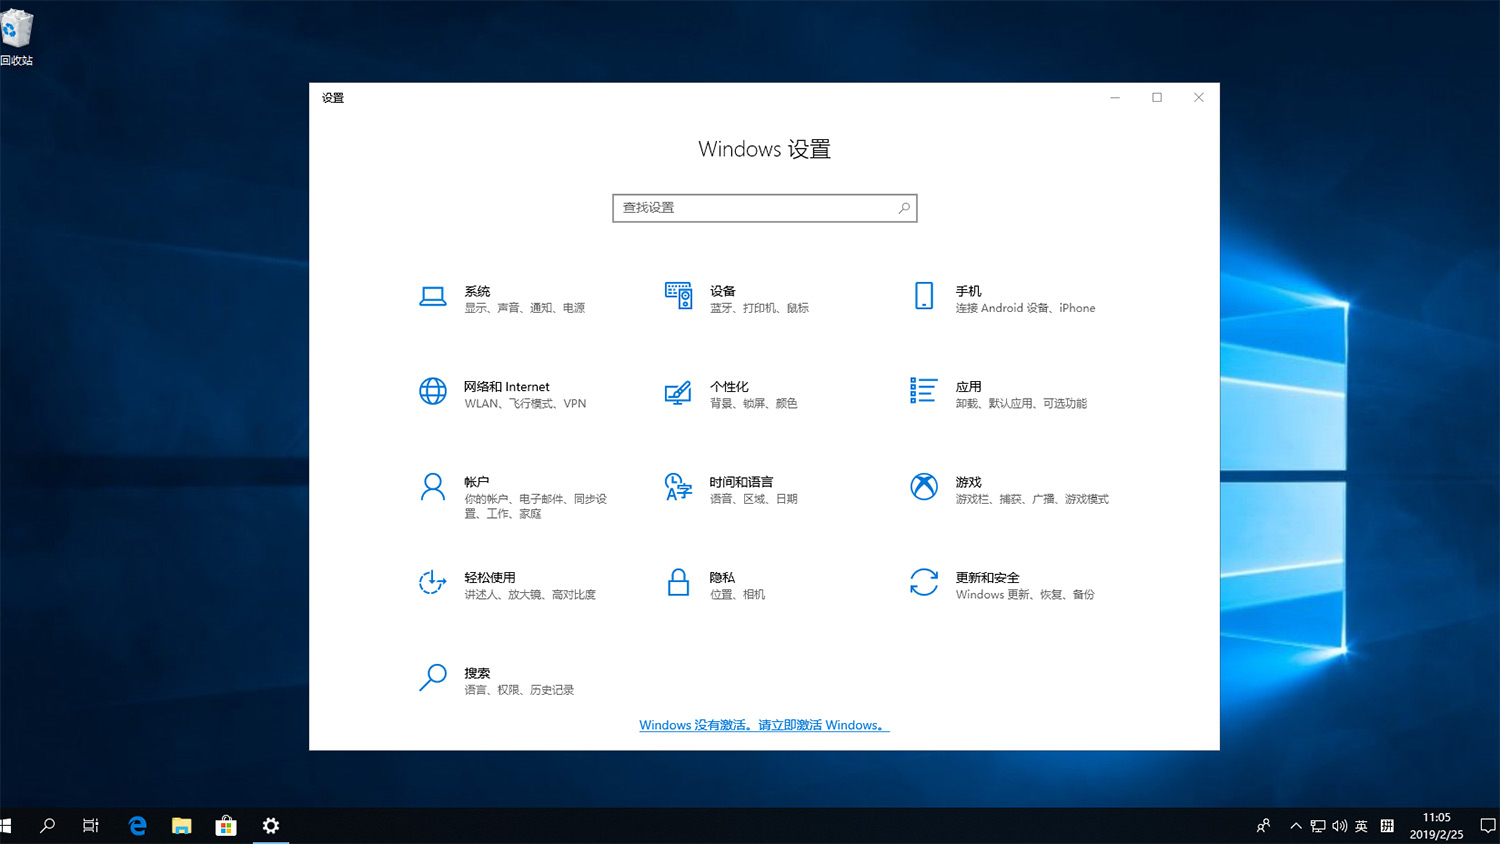 How To Change Display Language Chinese To English In Windows 10